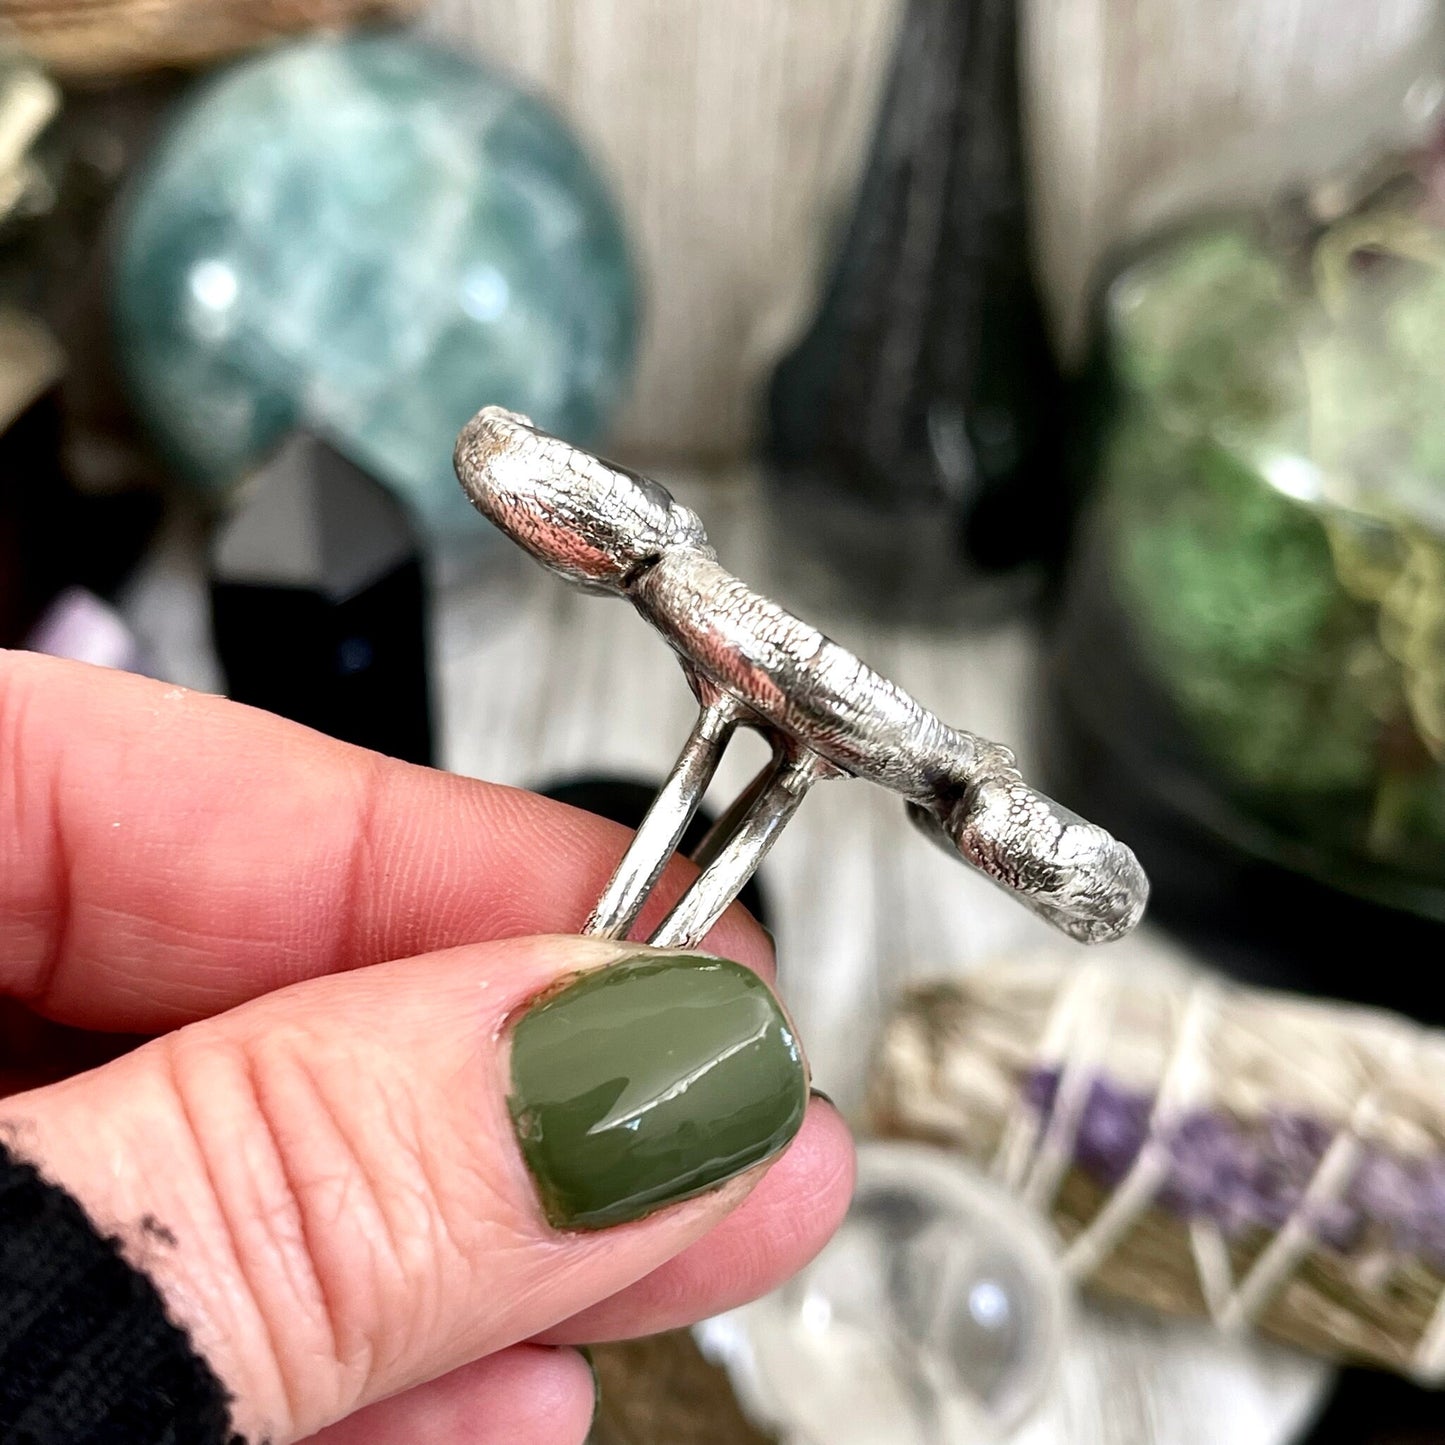 Size 10 Three Stone Ring- Tourmaline Quartz River Rock Sea Glass Crystal Ring Fine Silver / Foxlark Collection - One of a Kind / Jewelry